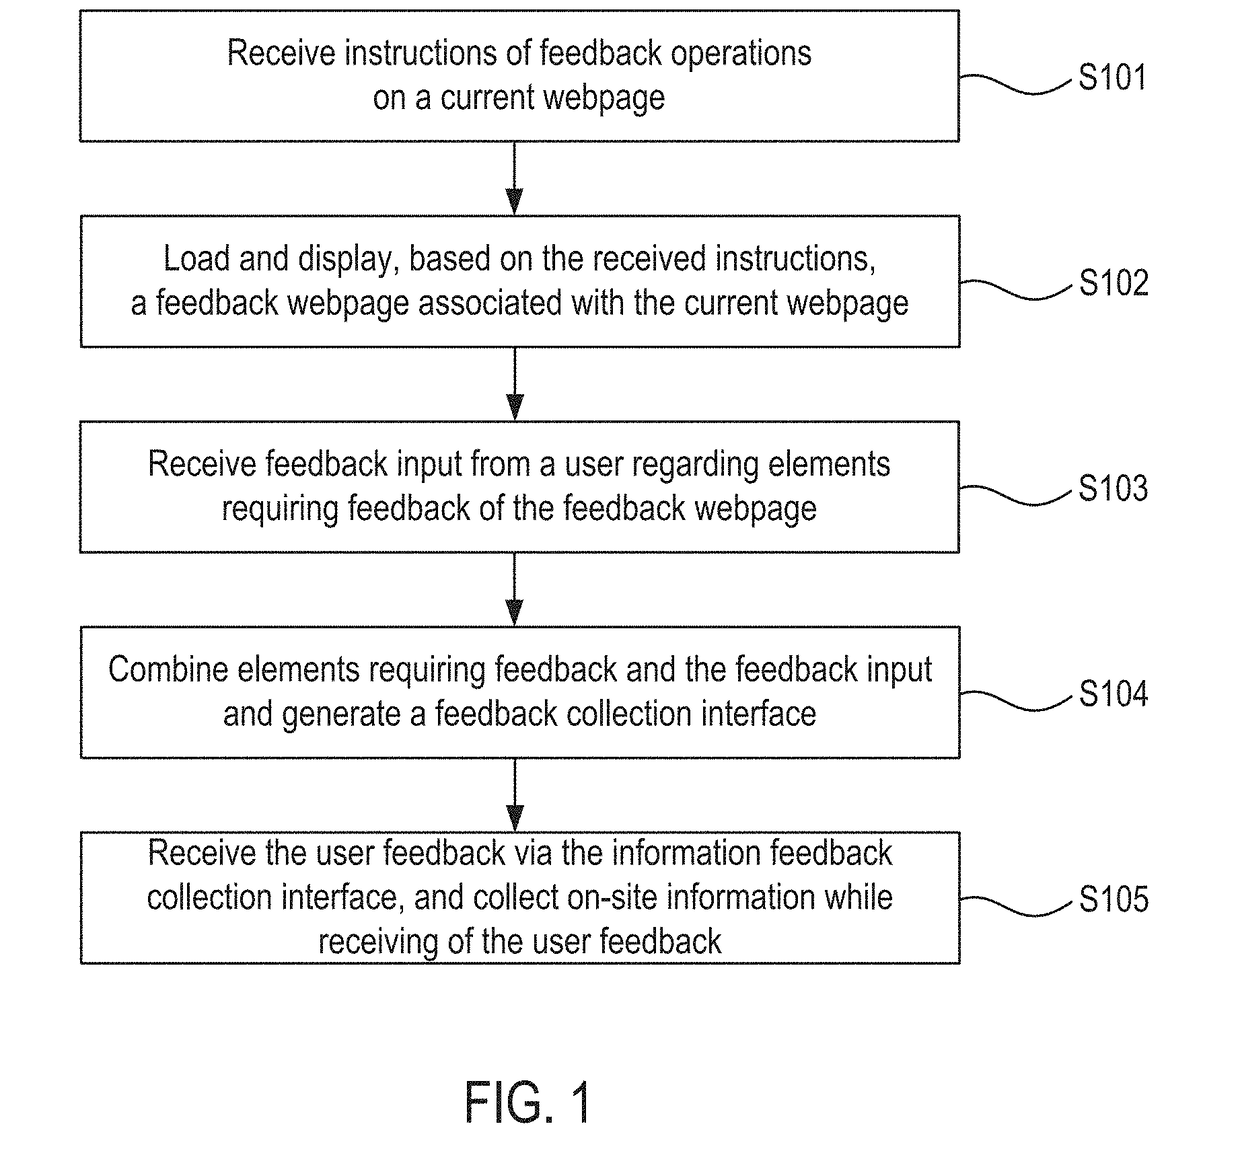 System, method, and apparatus for collecting and processing user feedback on webpages